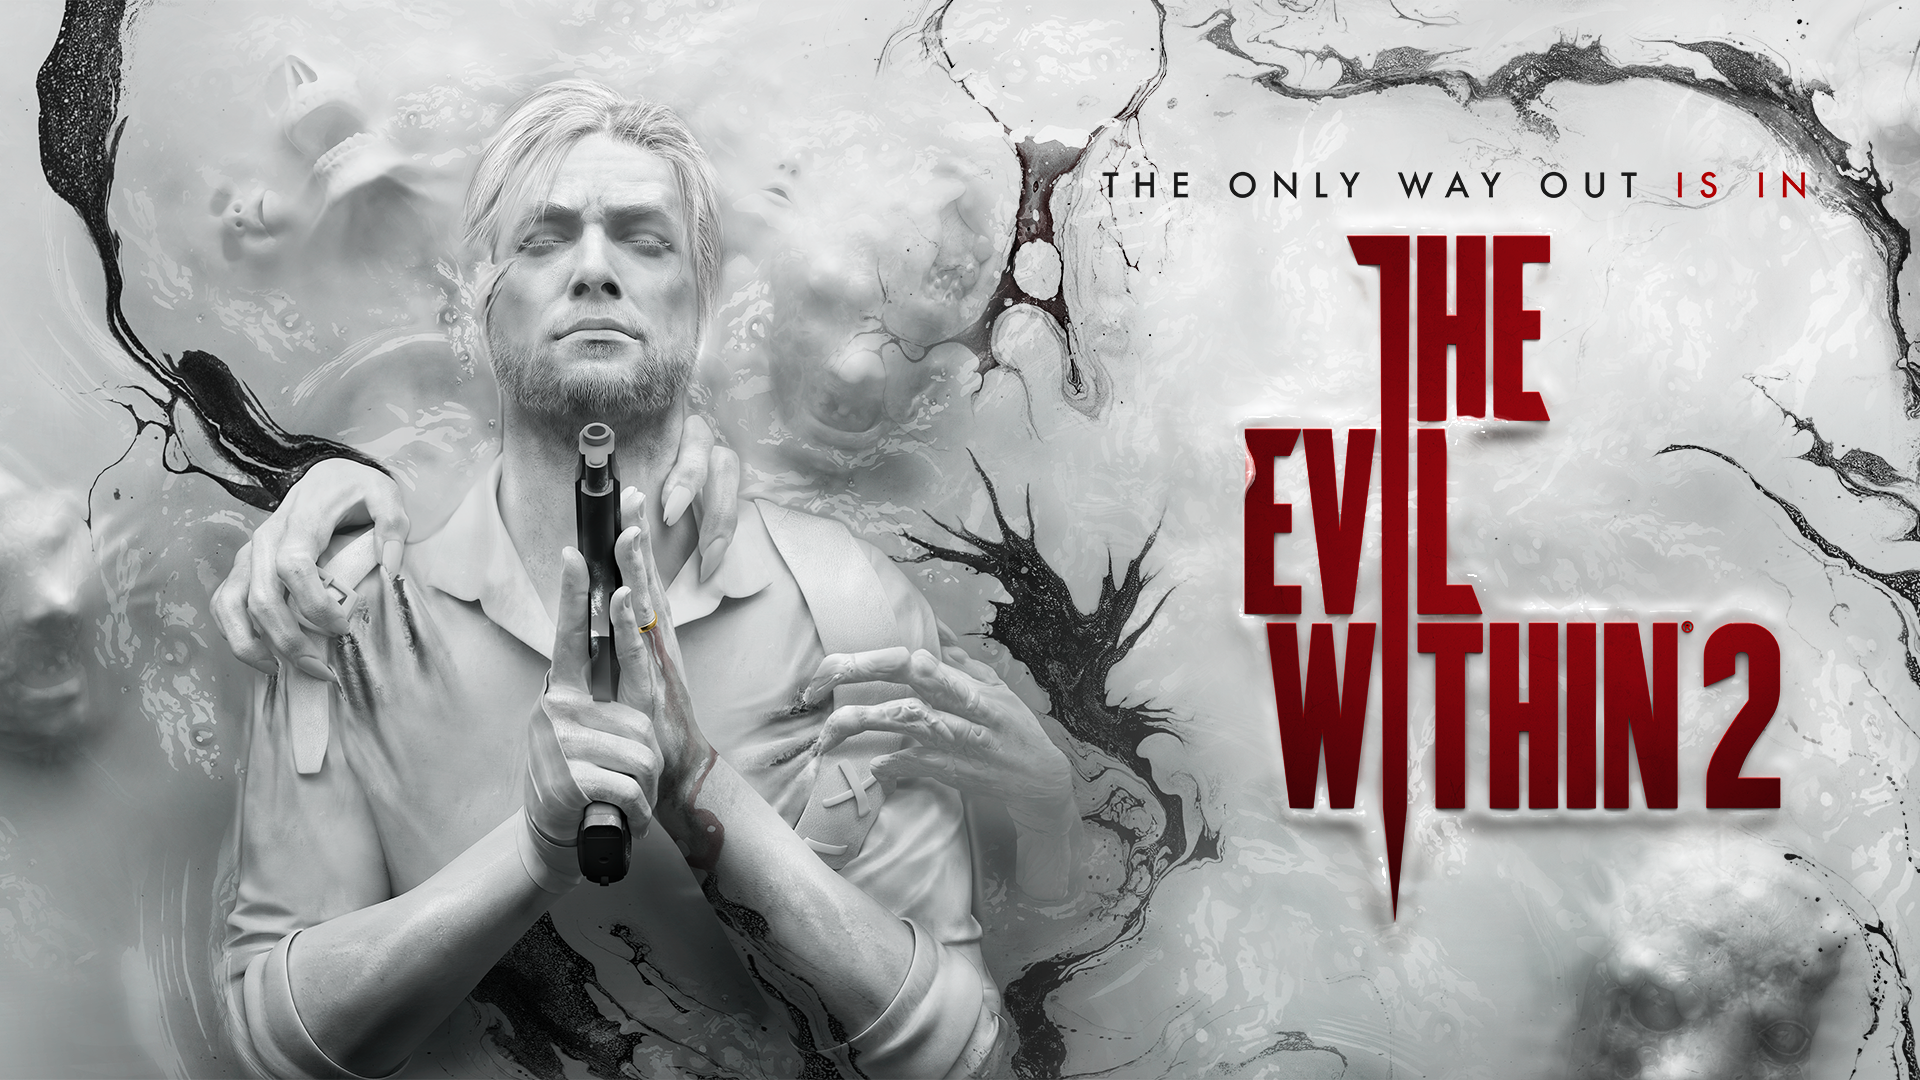 The Evil Within 2 | Available Now